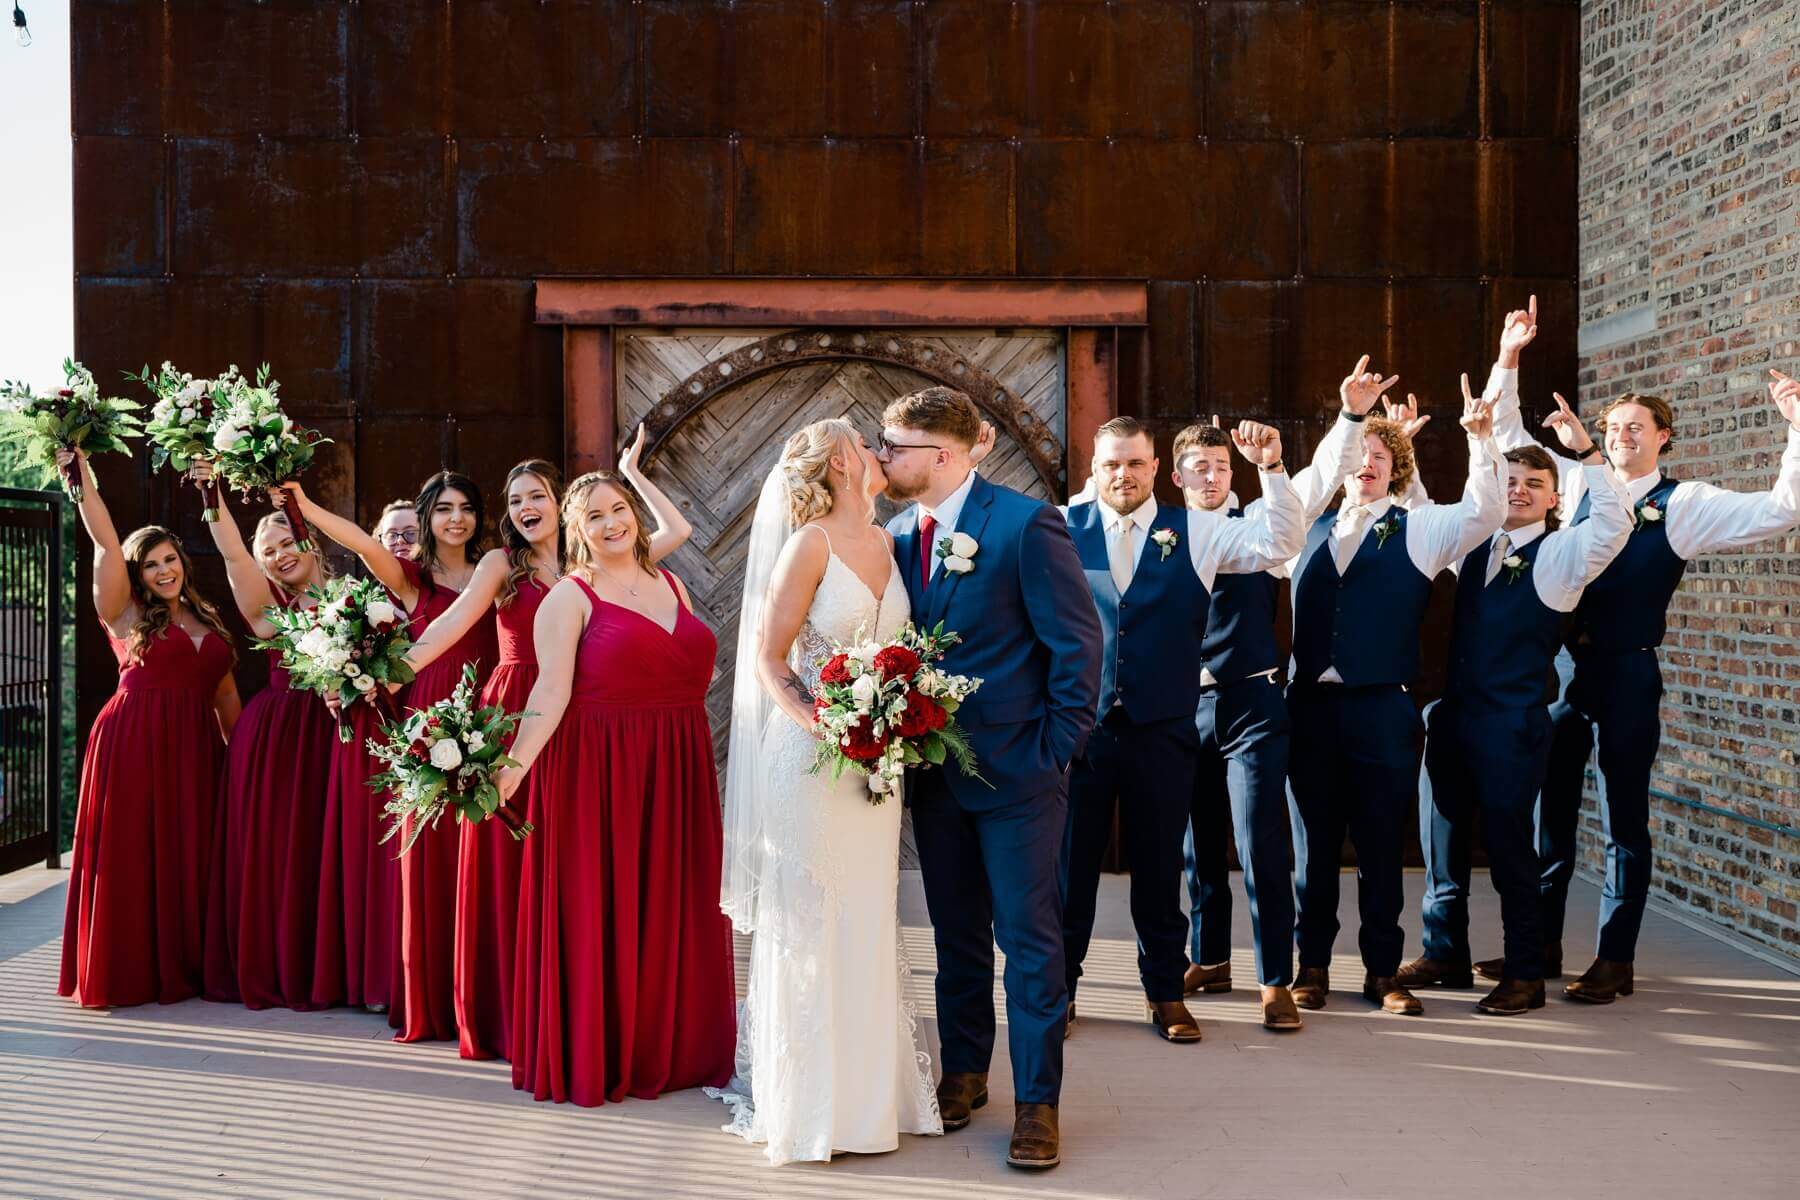 Bride and groom kissing as wedding party wearing red and blue cheer behind them